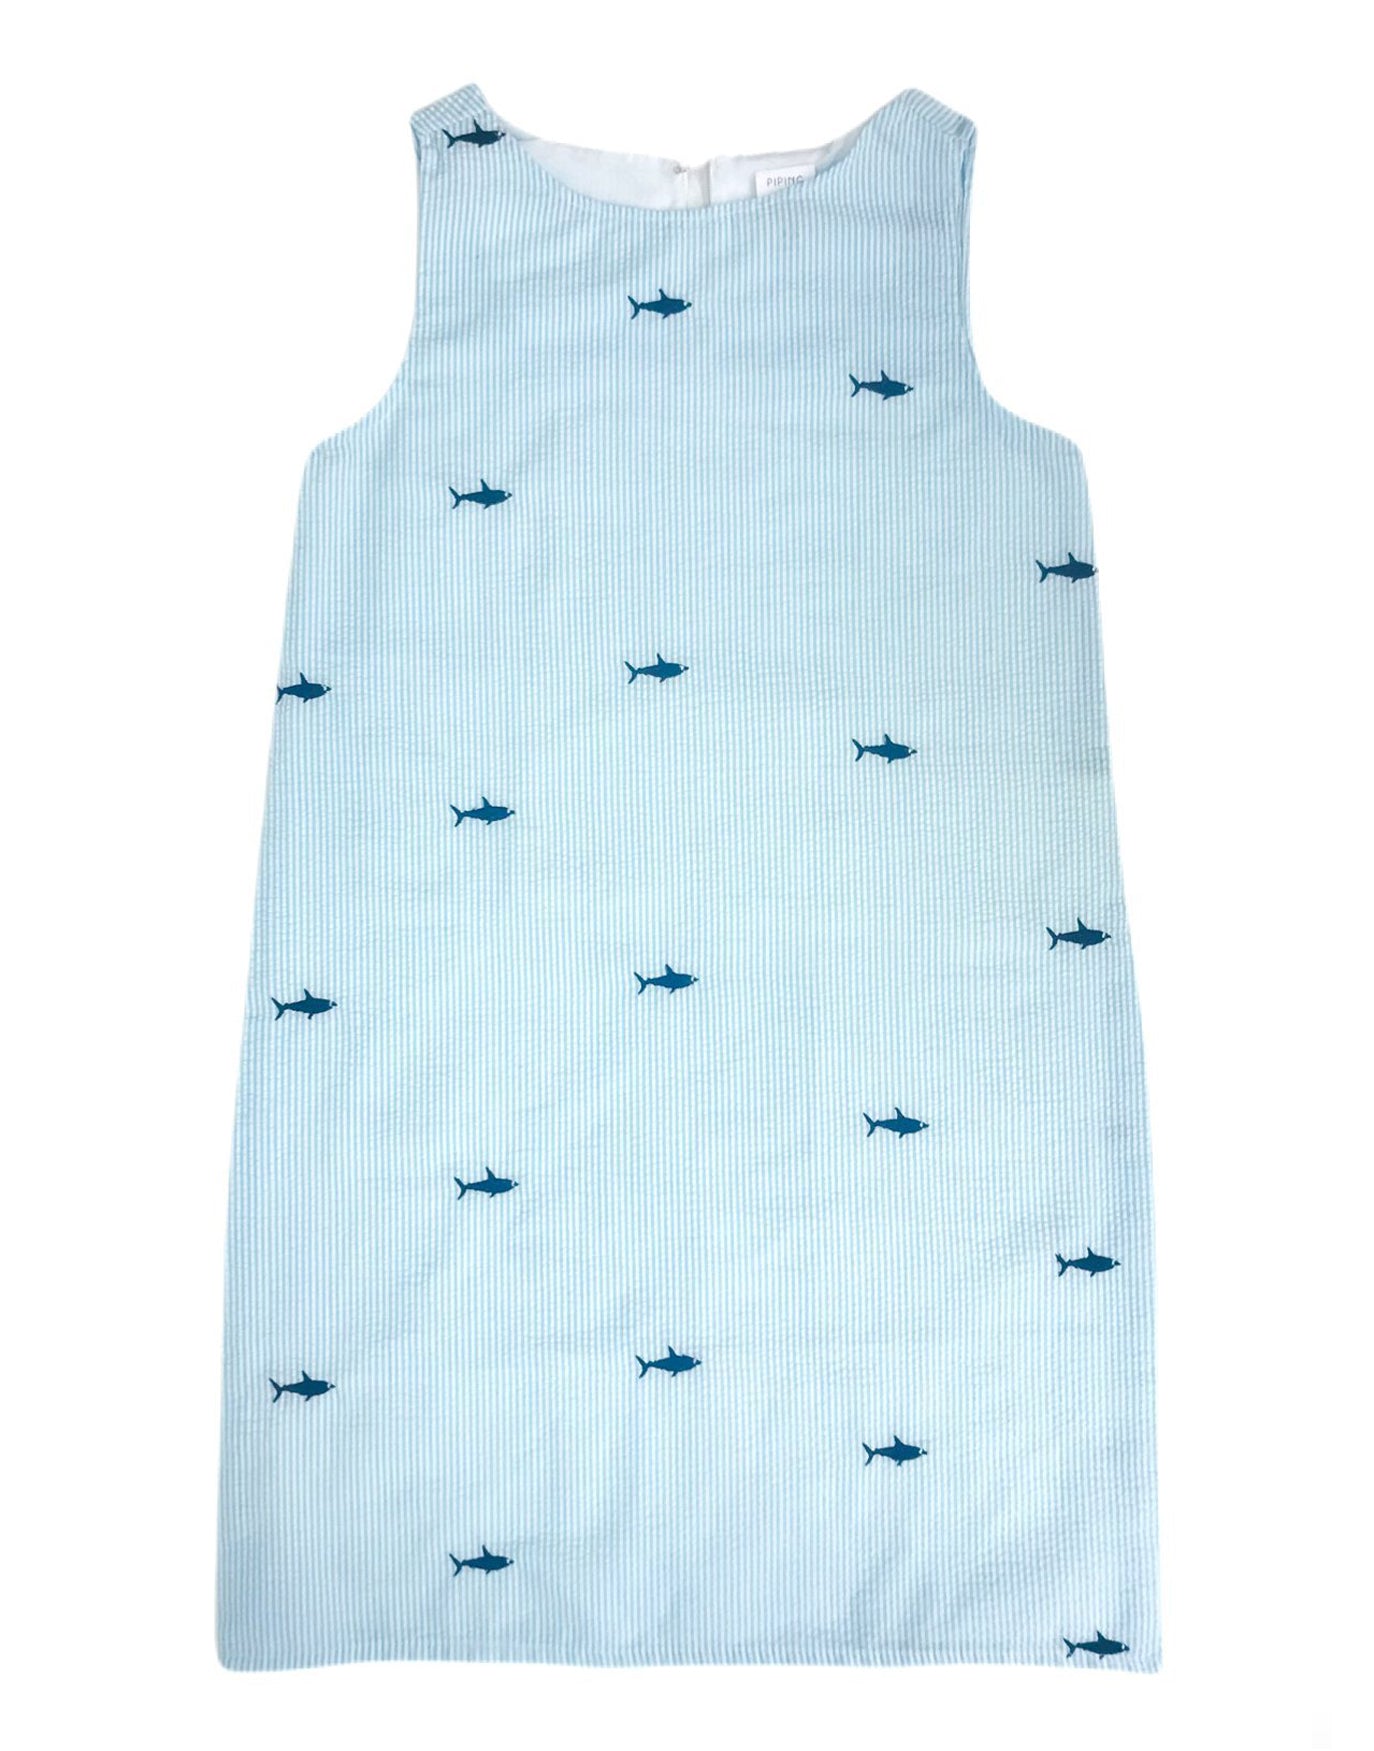 Turquoise Seersucker Women's Dress with Navy Embroidered Sharks